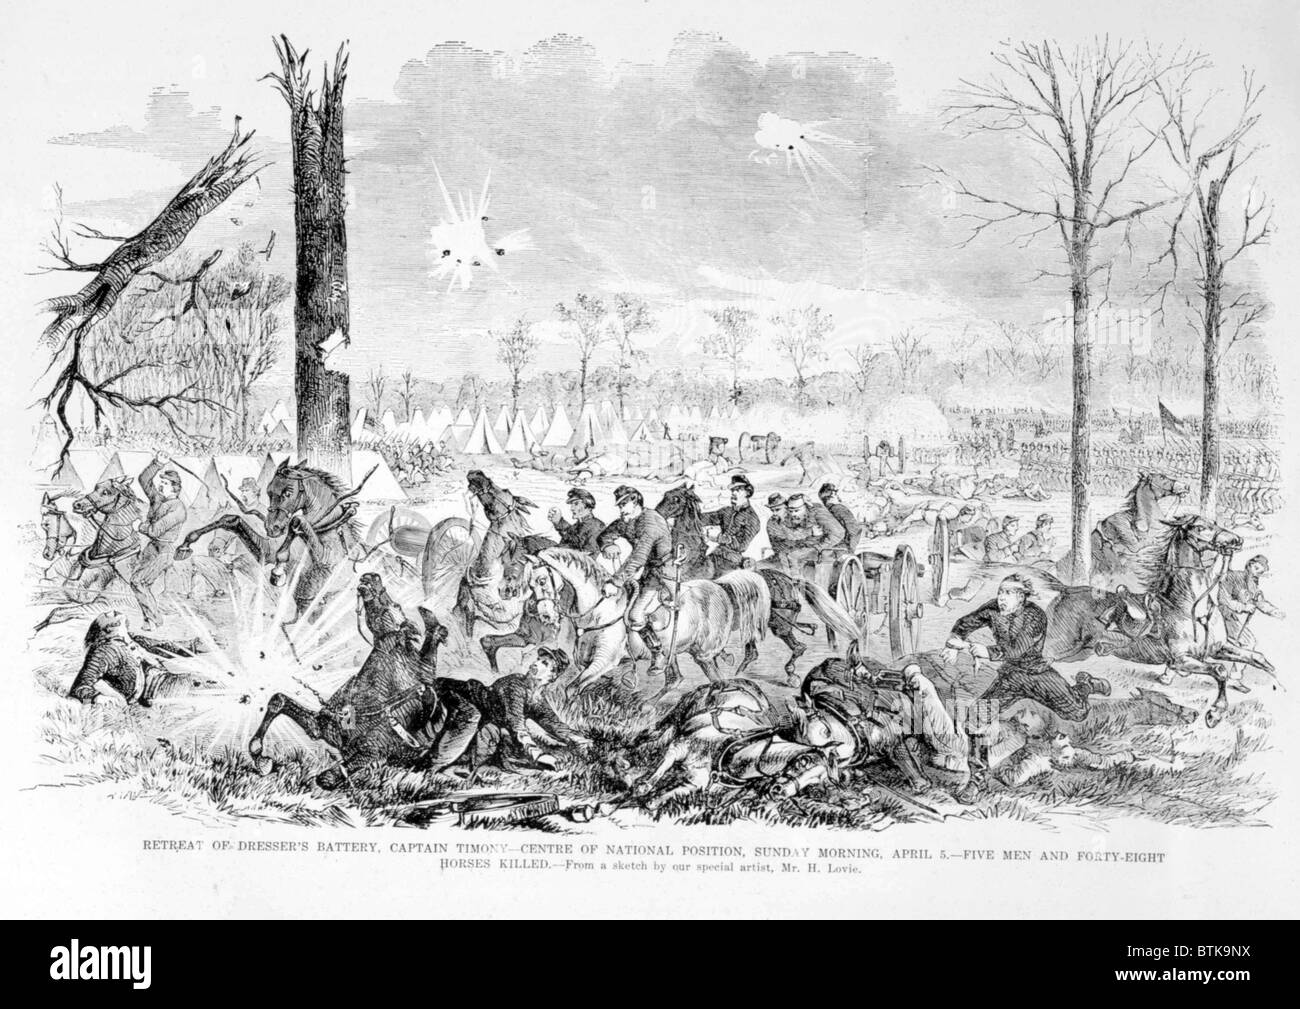 Retreat of Dressler's battery, April 5, 1862, from Leslie's Weekly Stock Photo